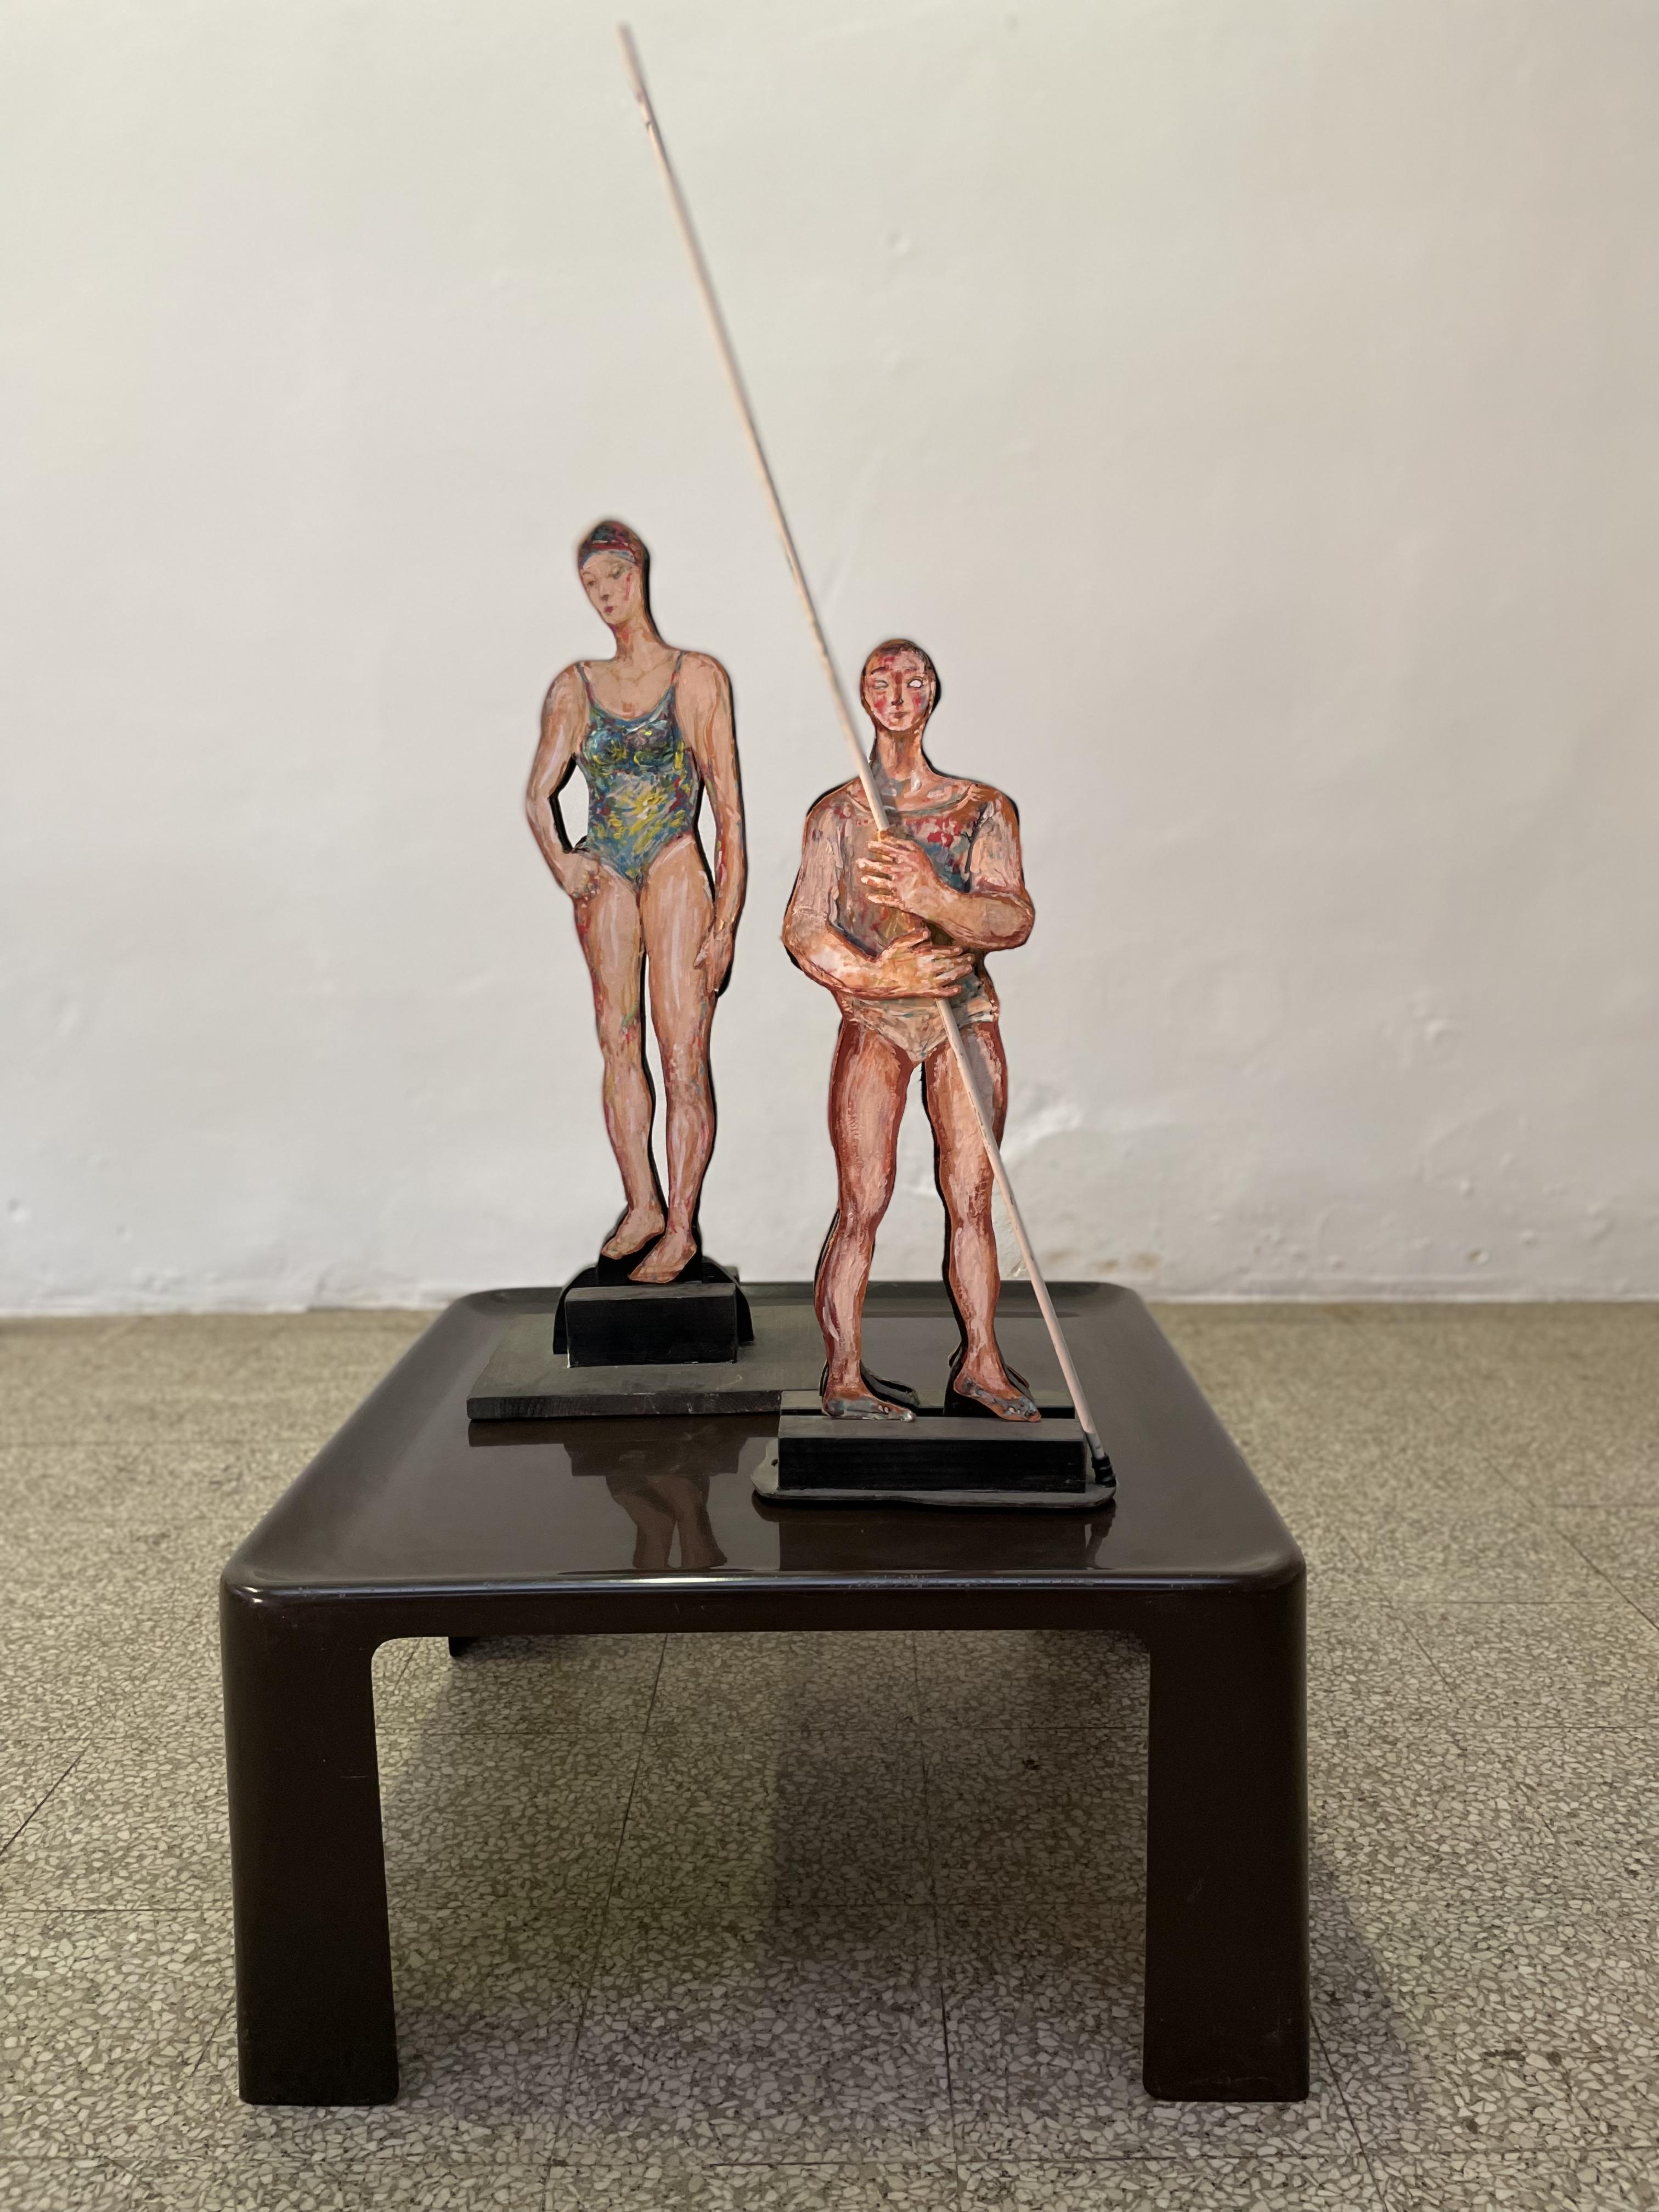 Introducing a stunning pair of hand painted wood sculptures by renowned artist Giuseppe Bacci (Aris Bacci's son), titled 